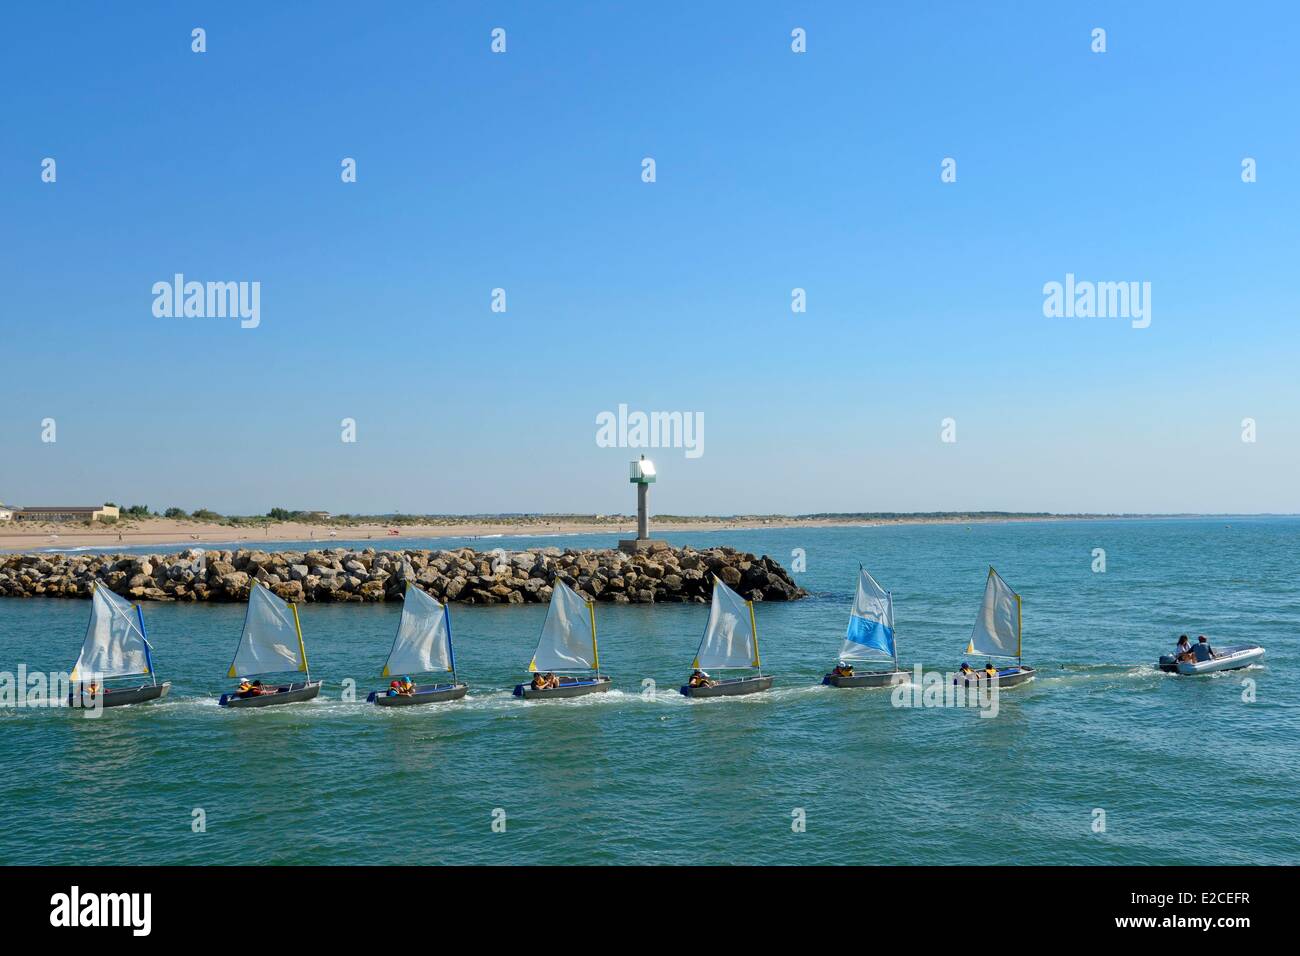 France, Herault, Valras Plage, row of small sailboats called Optimist on the river Orb which throws into the sea Stock Photo